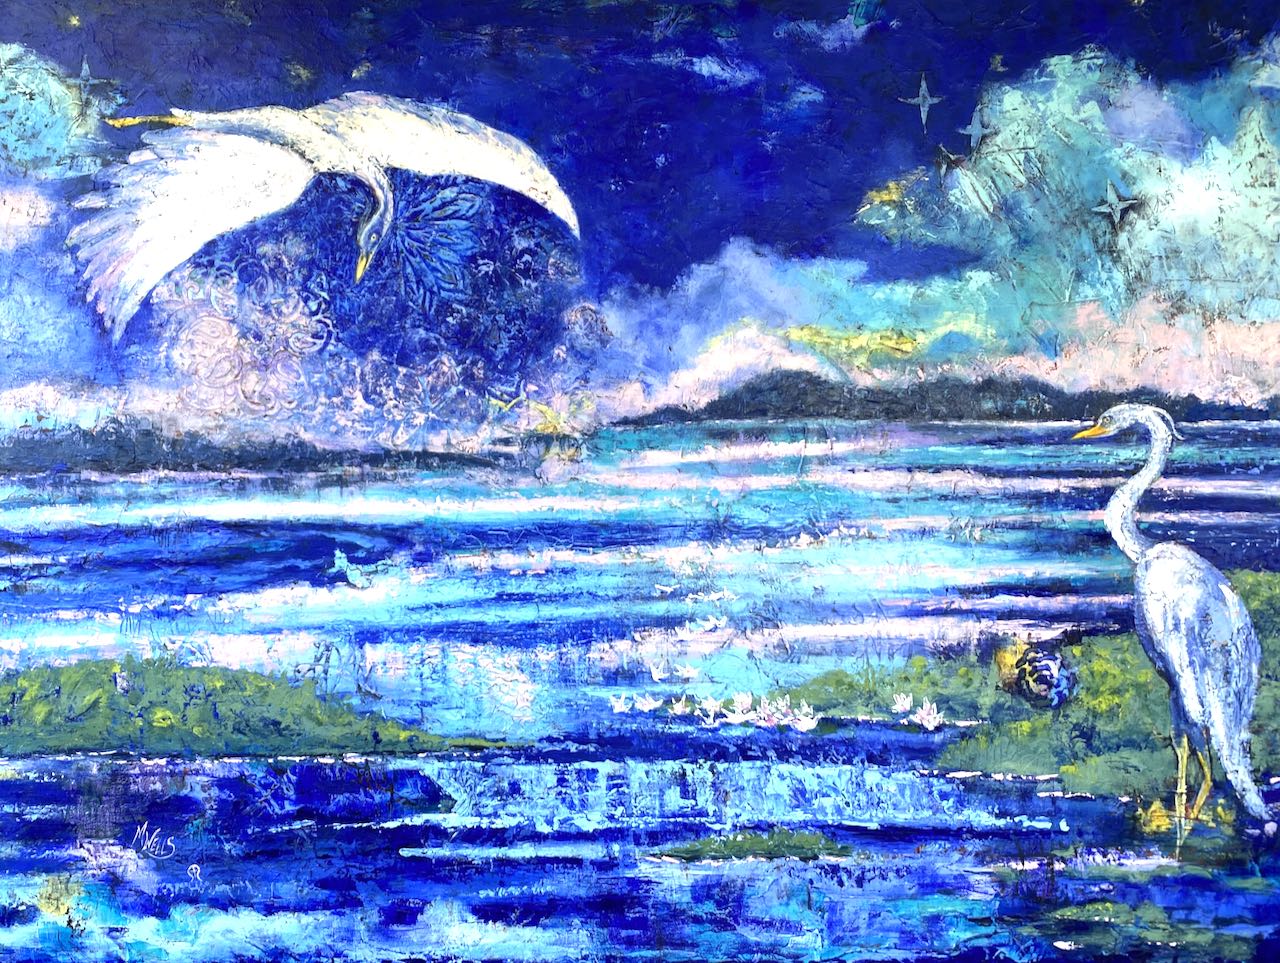 "Blue Heron Requiem" By Marilyn Wells Original Oil Painting cold wax, oil and cold wax, herons, blue skies, poetry and art